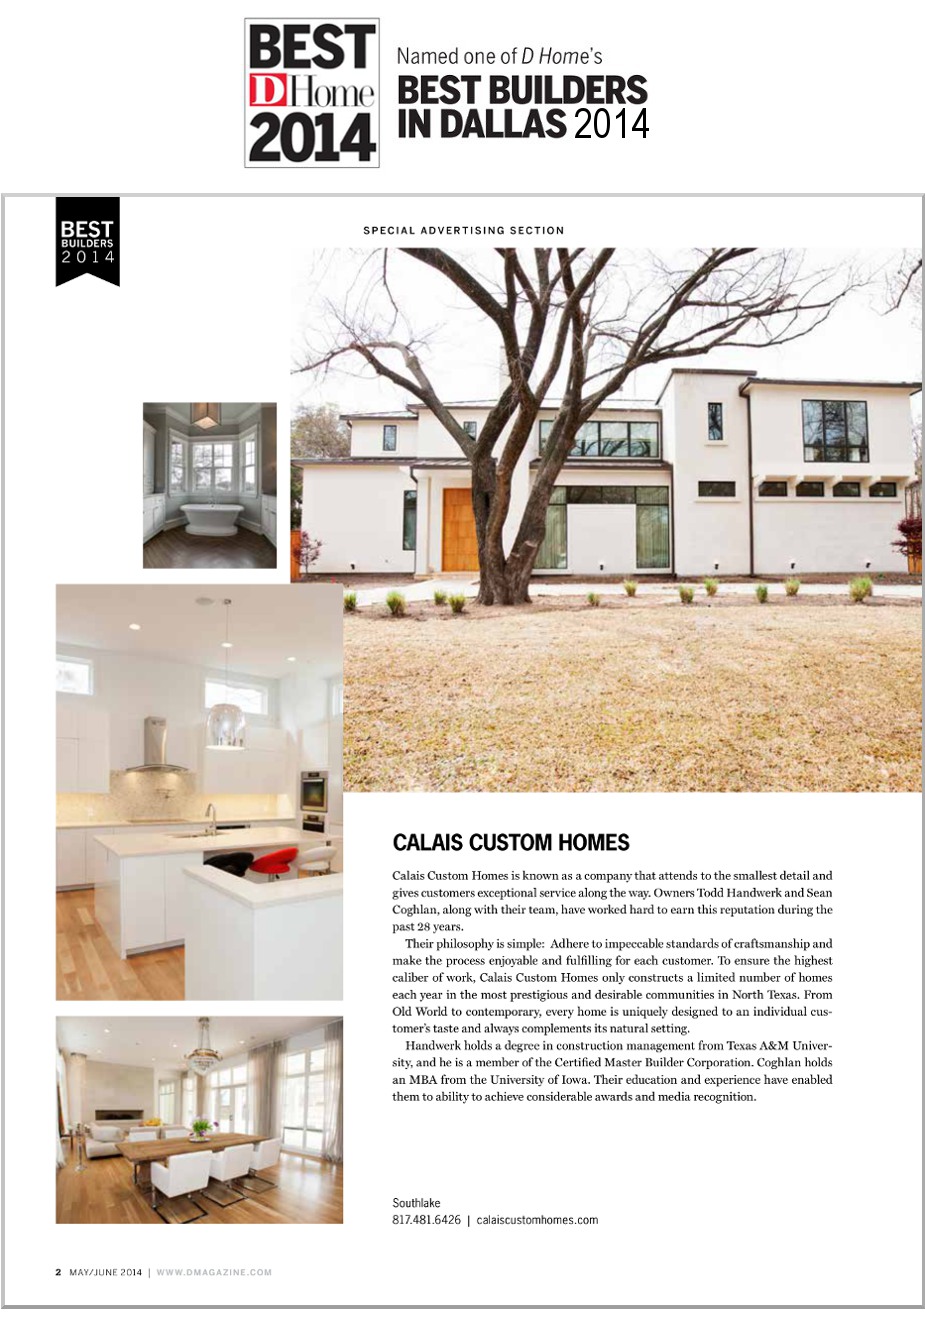 2014 DHome Best Builder Award Article